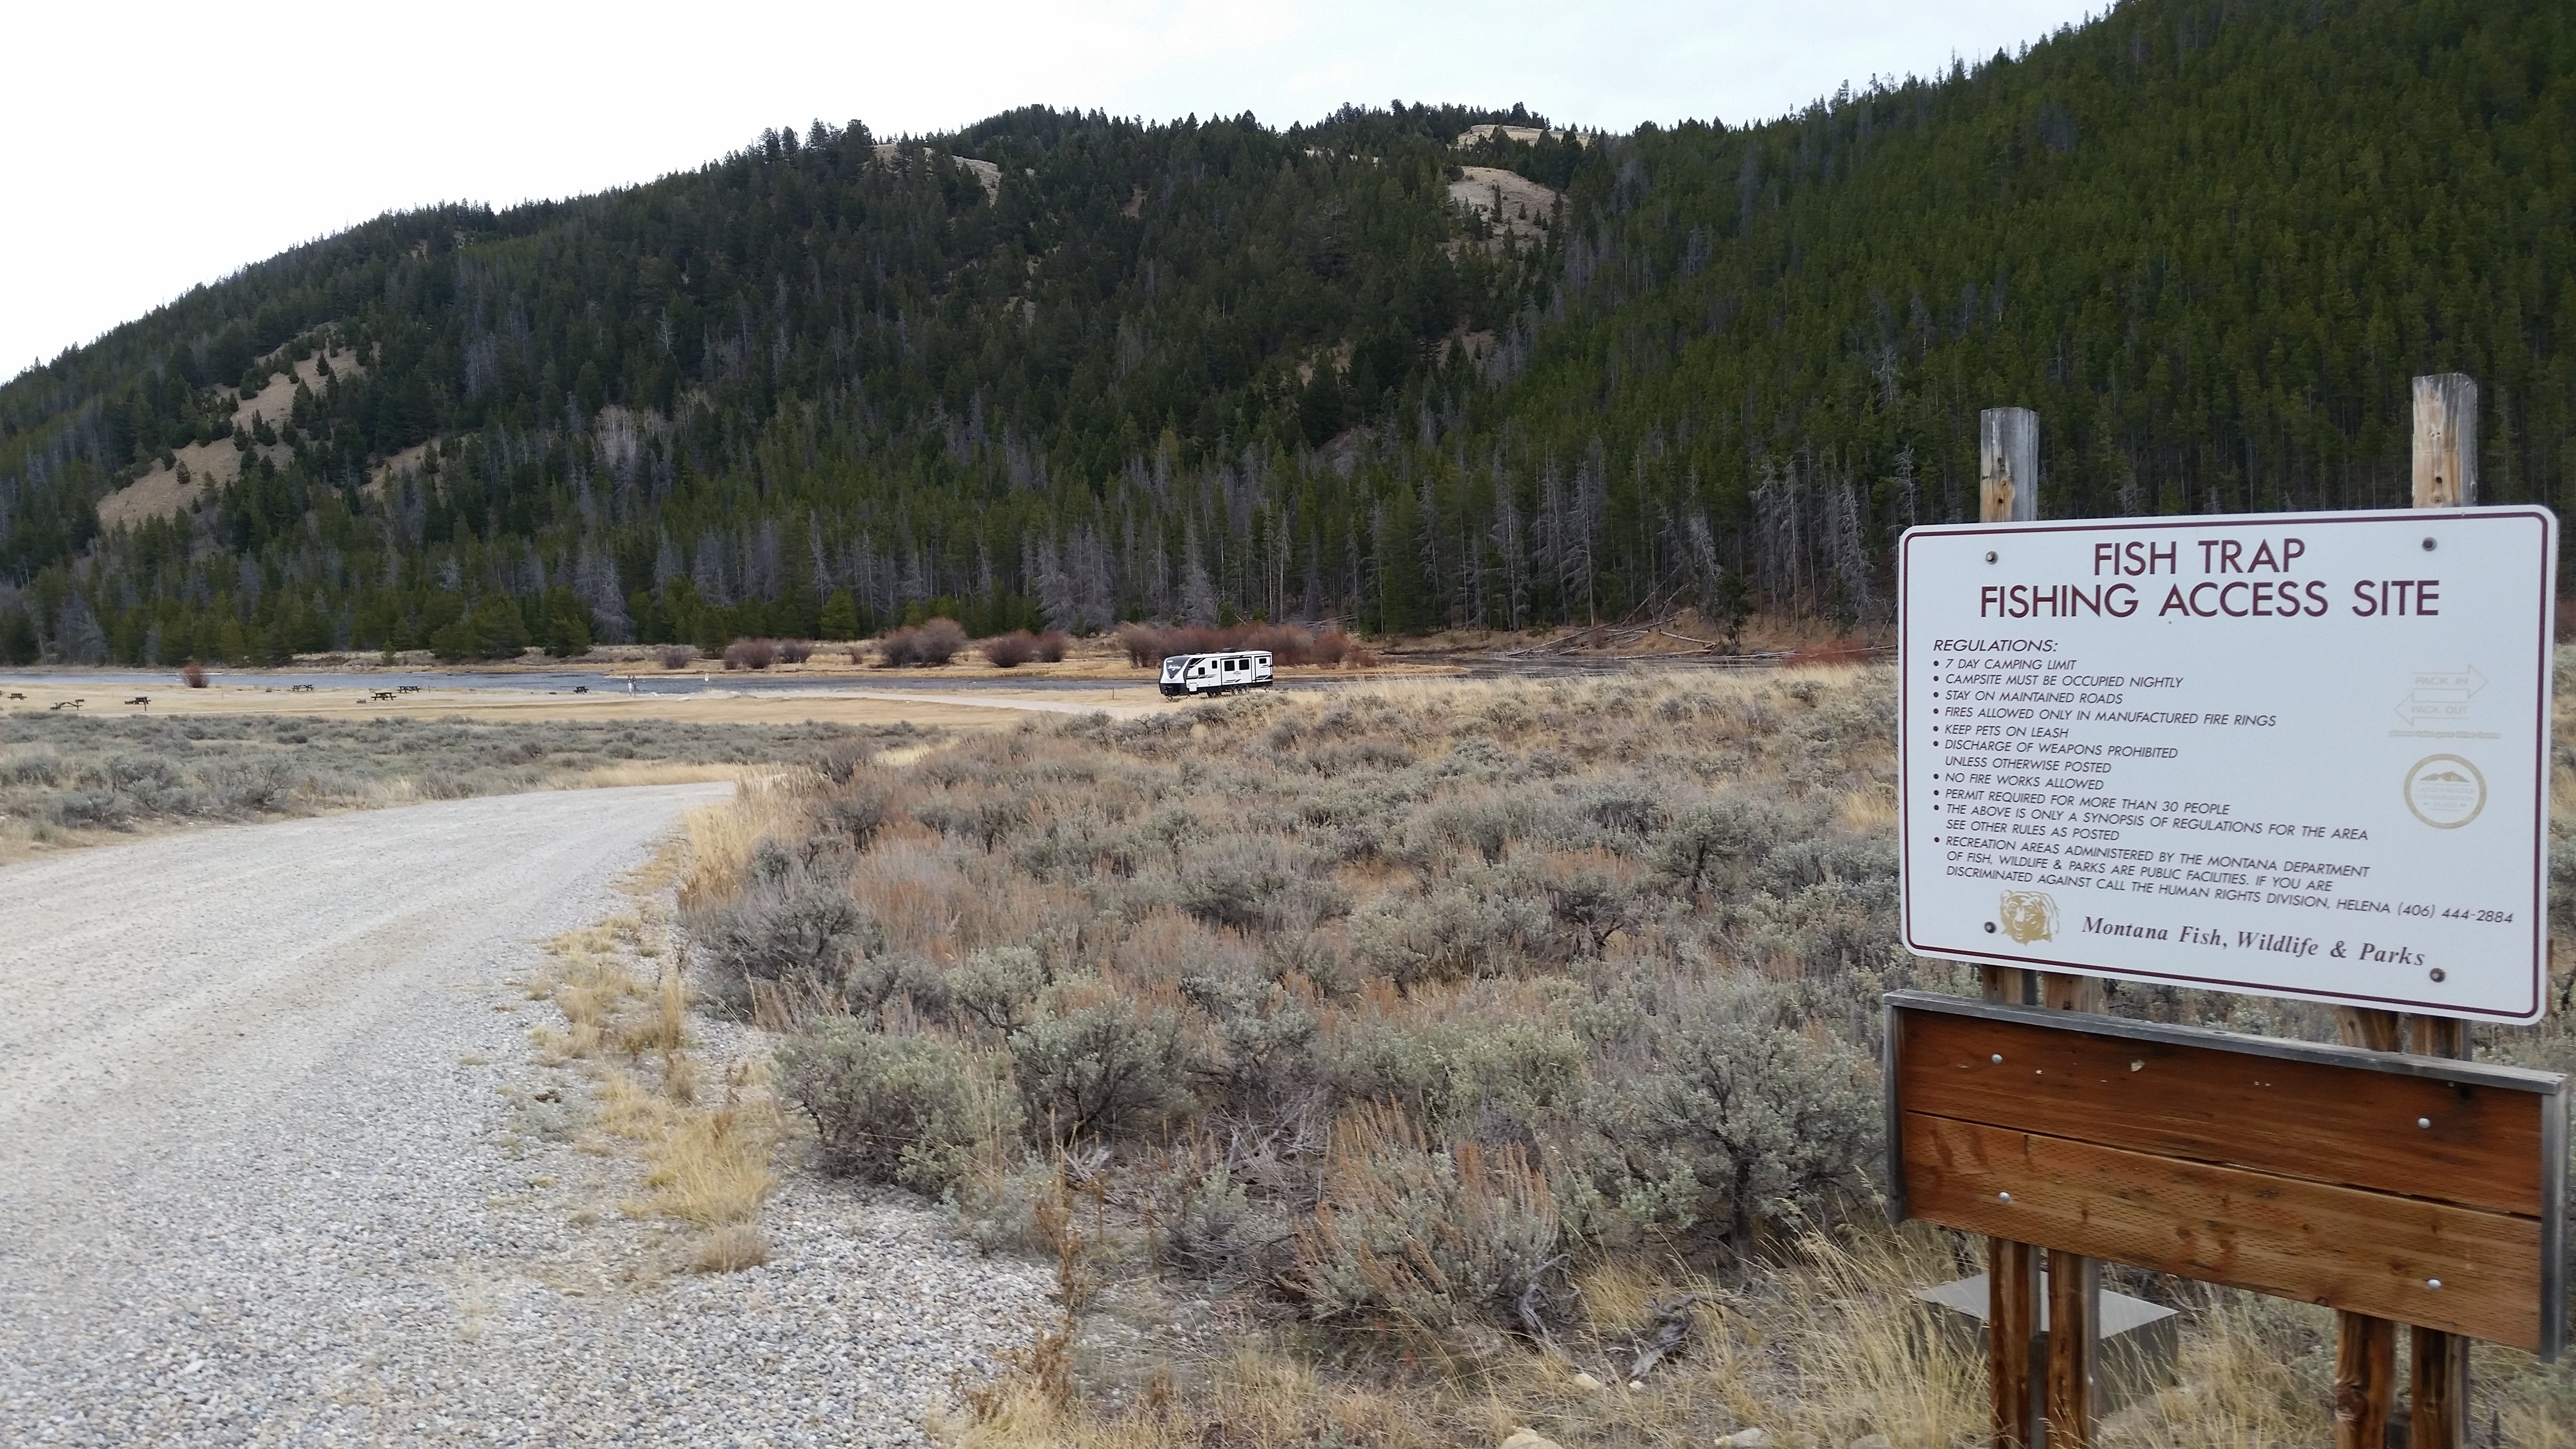 Camper submitted image from Fishtrap Creek Montana FWP - 3